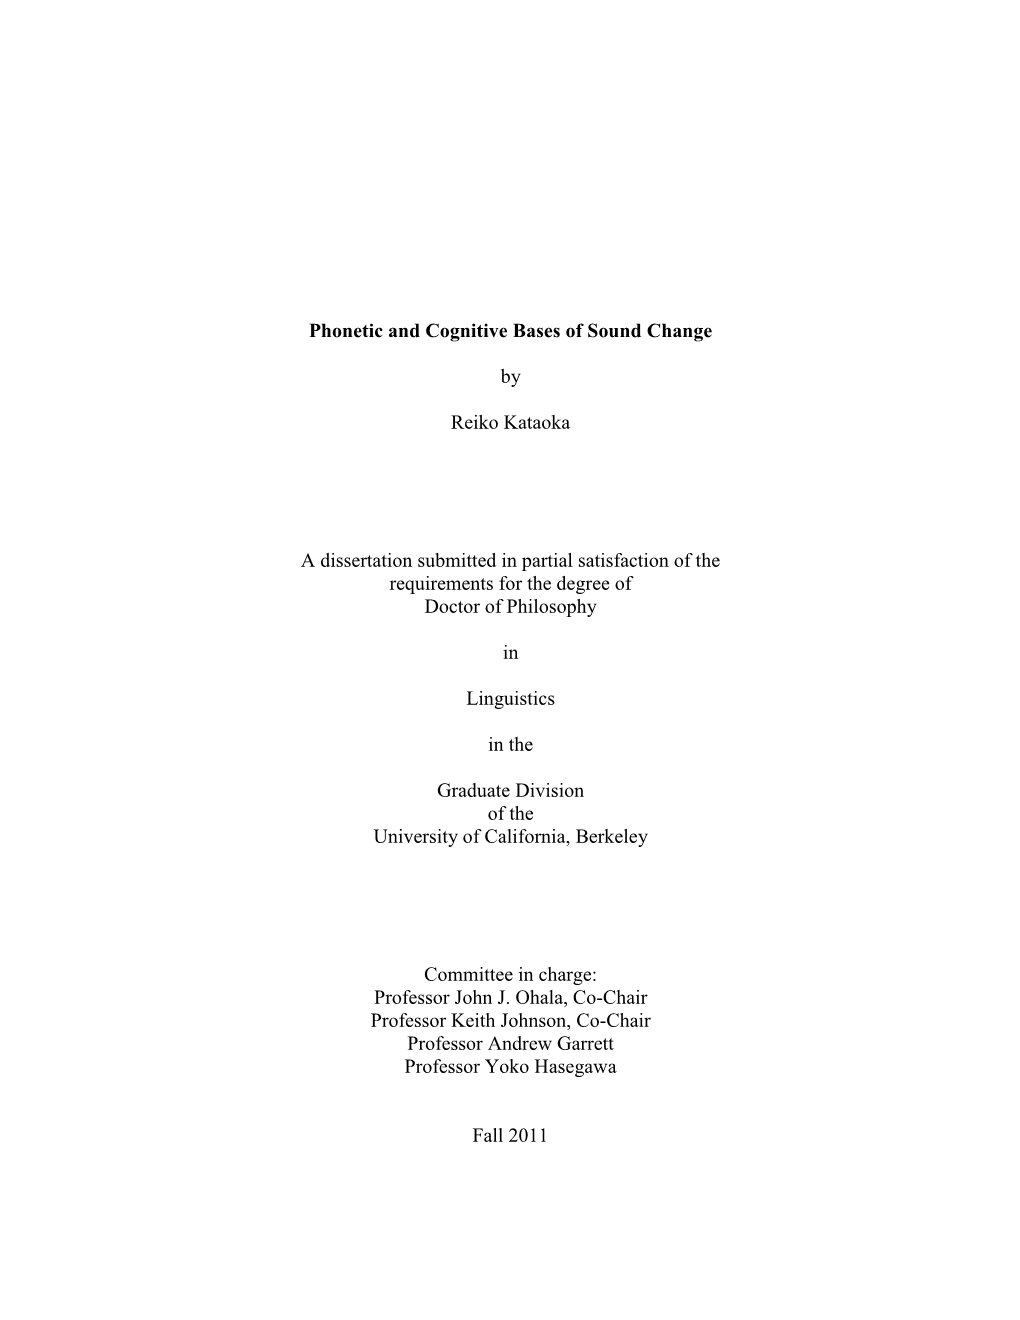 Phonetic and Cognitive Bases of Sound Change by Reiko Kataoka A